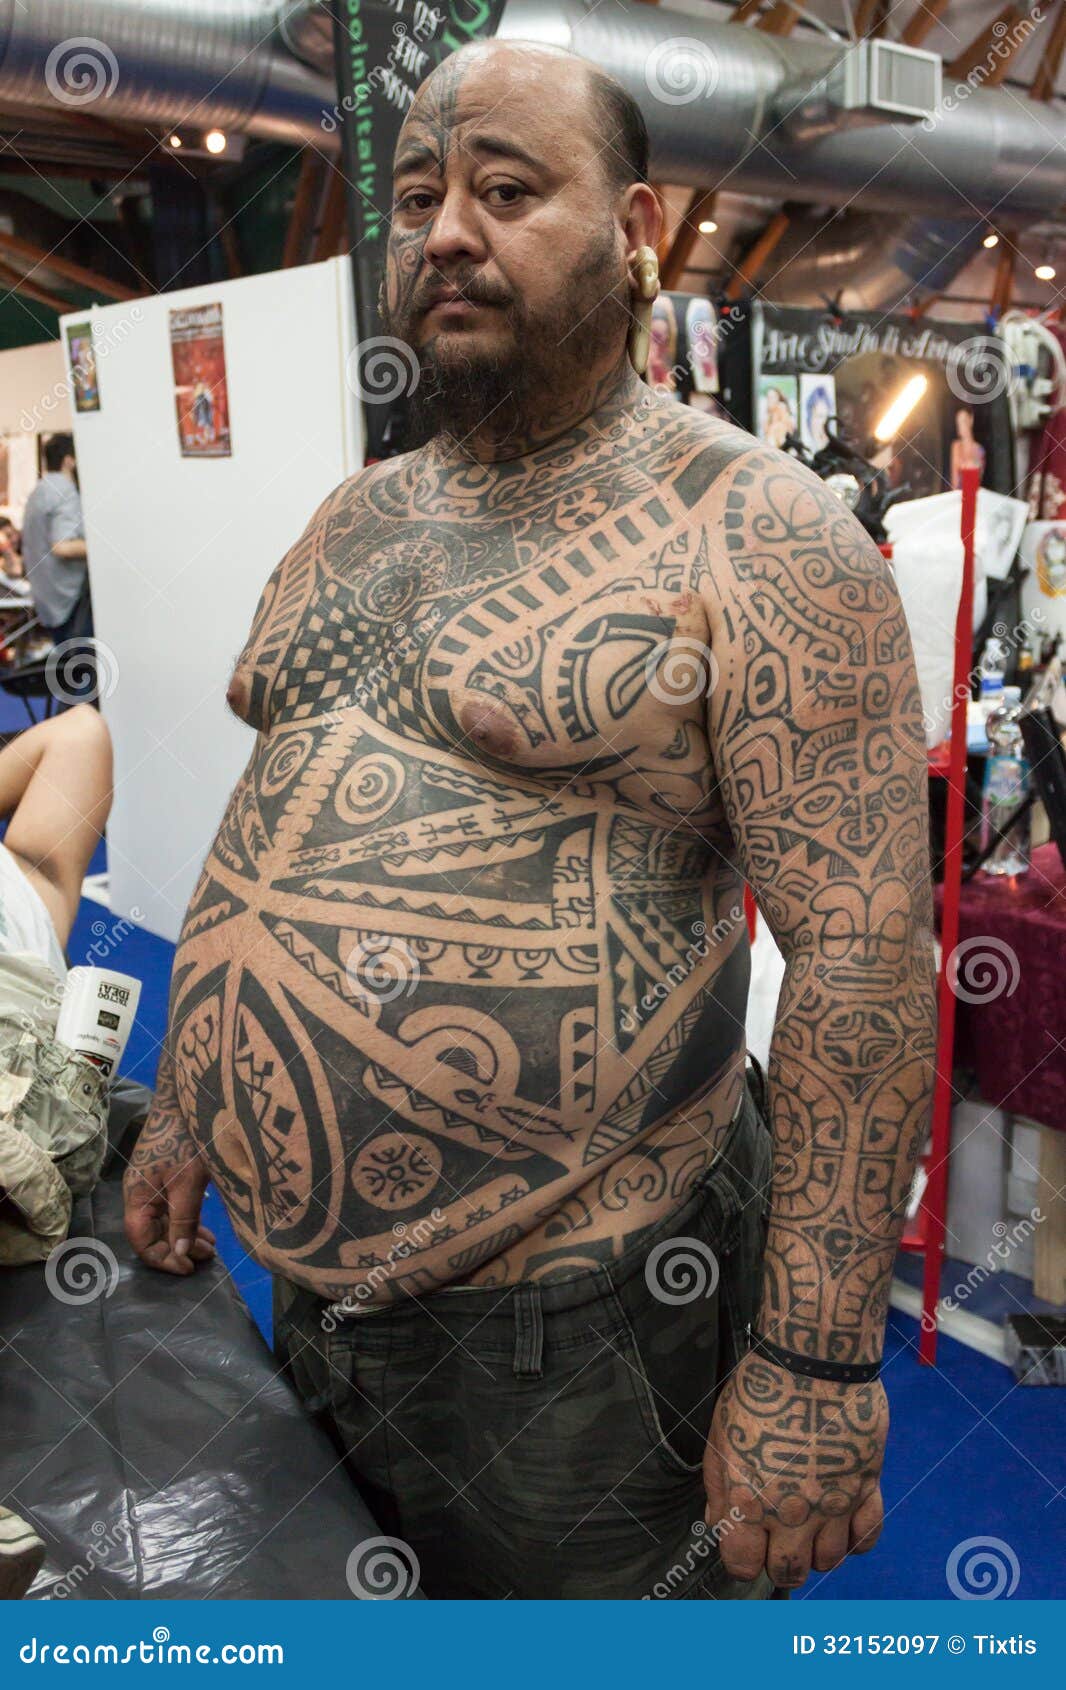 people-tattoo-convention-milan-italy-july-portrait-fat-bearded-man-tatuami-important-event-dedicated-to-world-32152097.jpg